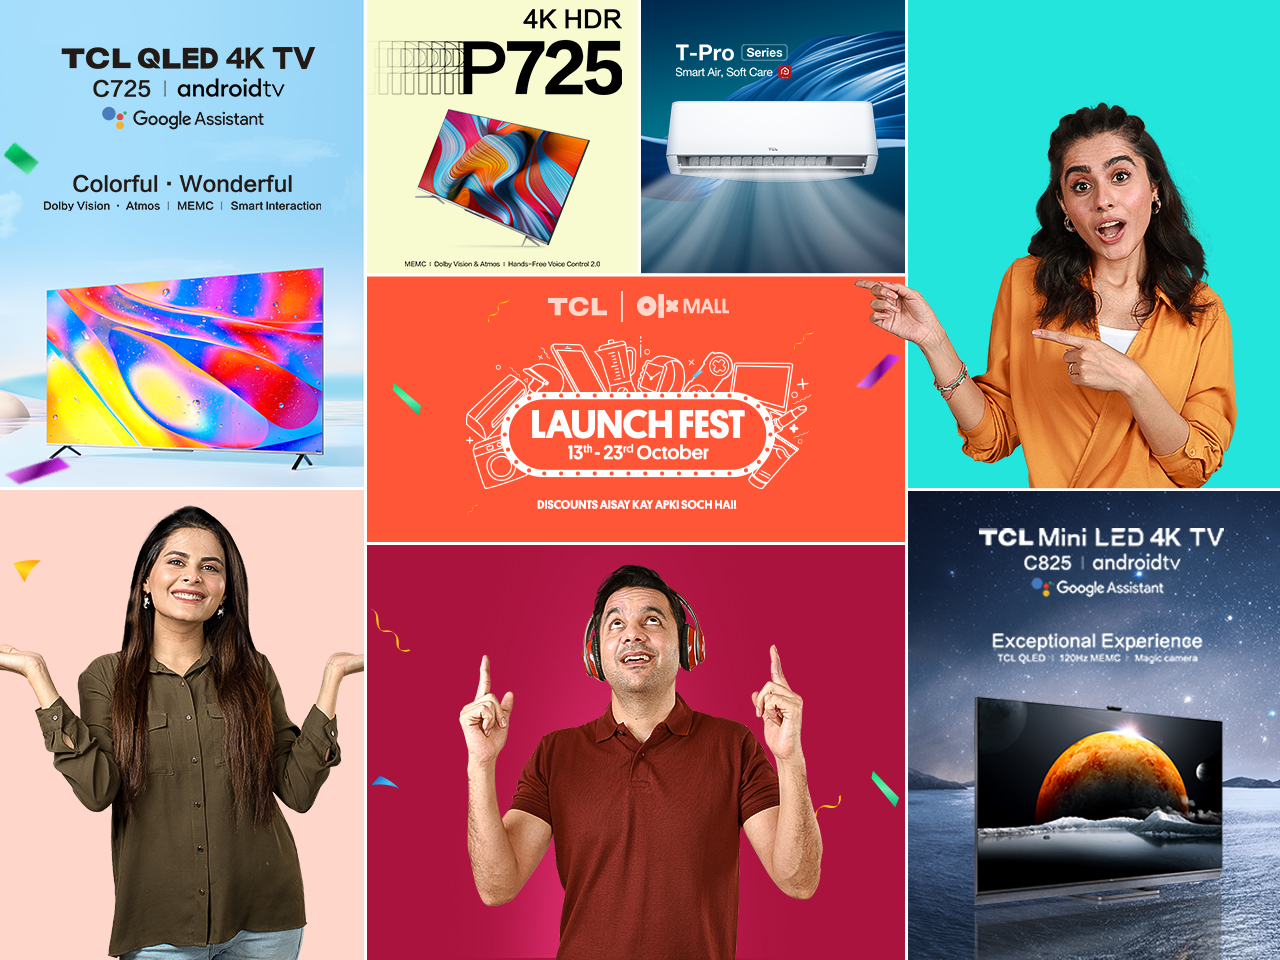 TCL Pakistan launches its Official Store on Olx Mall